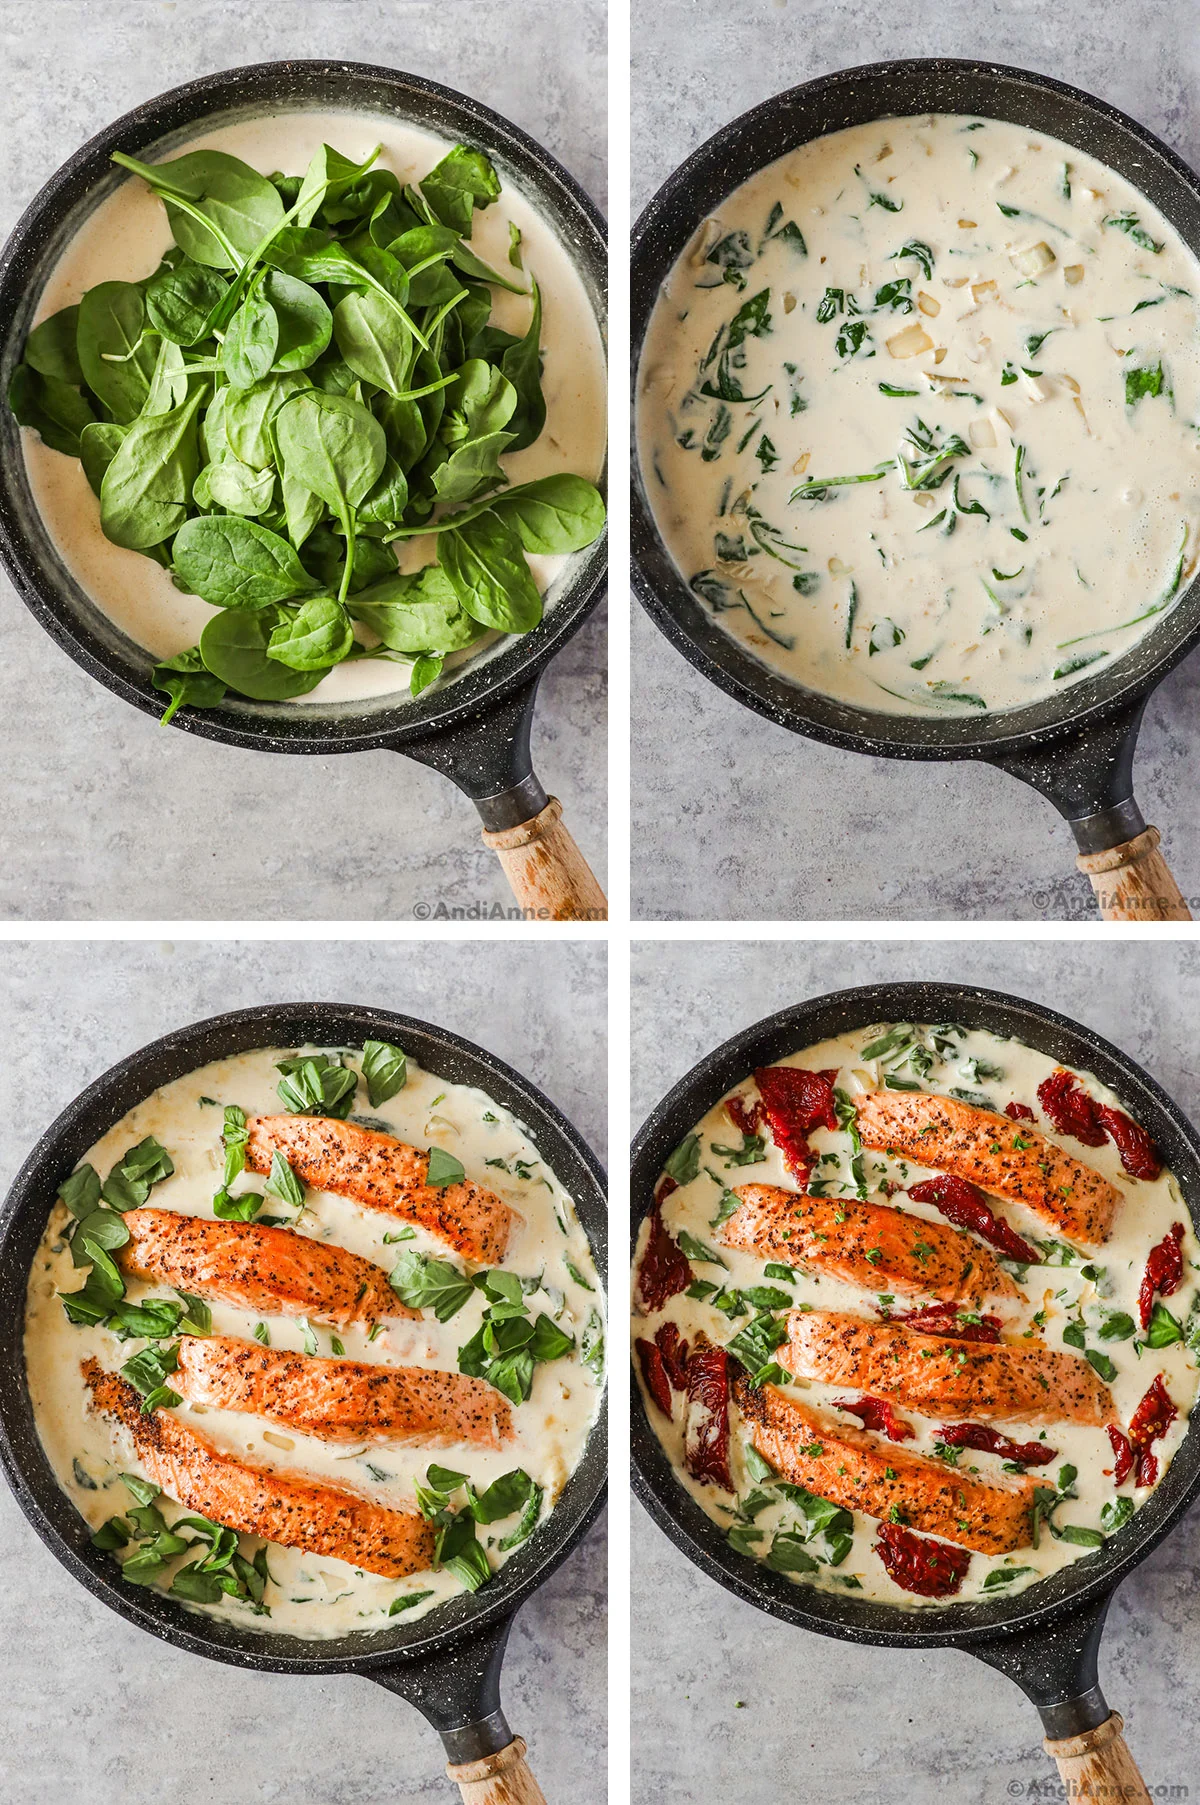 Four images grouped together. First has baby spinach dumped over creamy sauce in frying pan. Second image is wilted spinach in the creamy sauce. Third has salmon fillets and fresh basil added to pan. Fourth has sun dried tomatoes added.